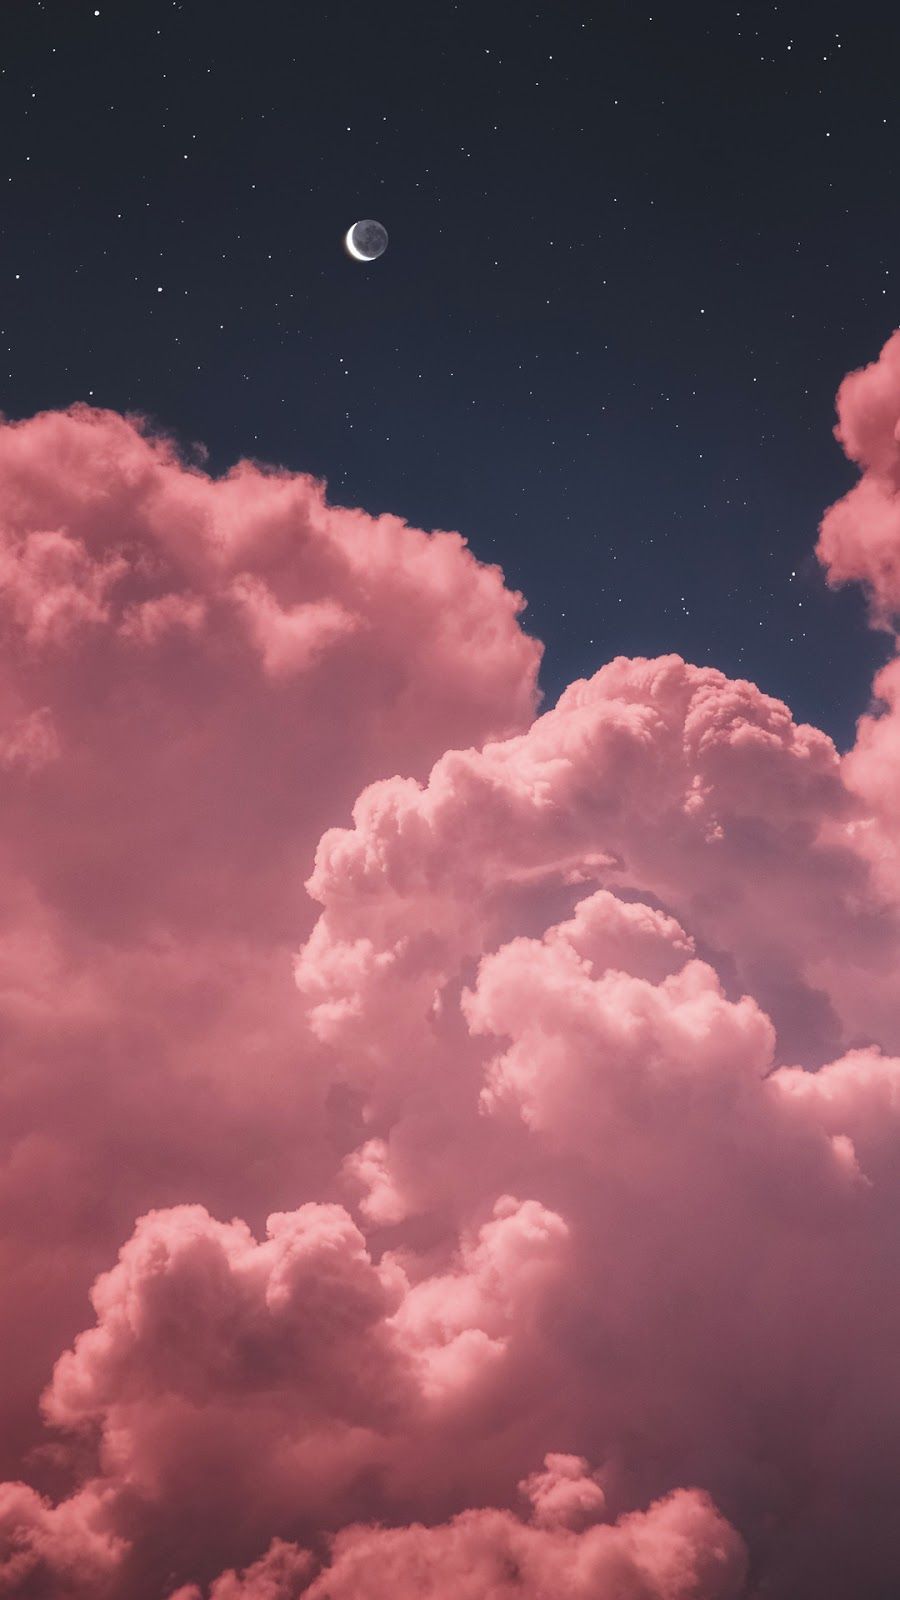 Two moon in the night sky #wallpaper #iphone #android #background #followme. Pink clouds wallpaper, Cloud wallpaper, Night sky wallpaper